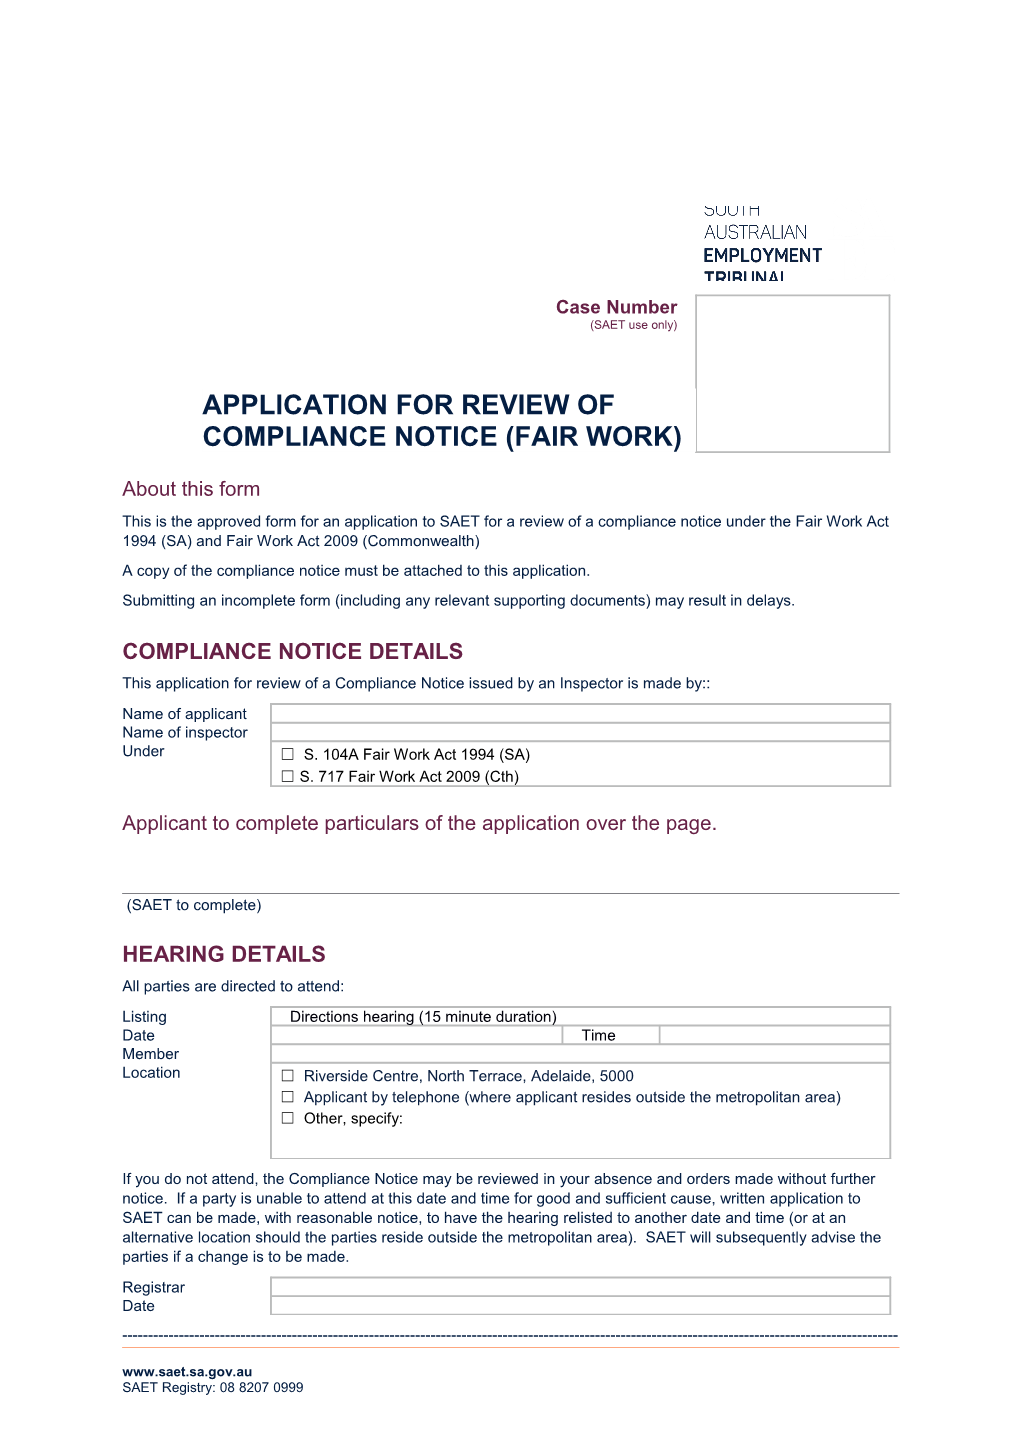 Application for Review of Compliance Notice